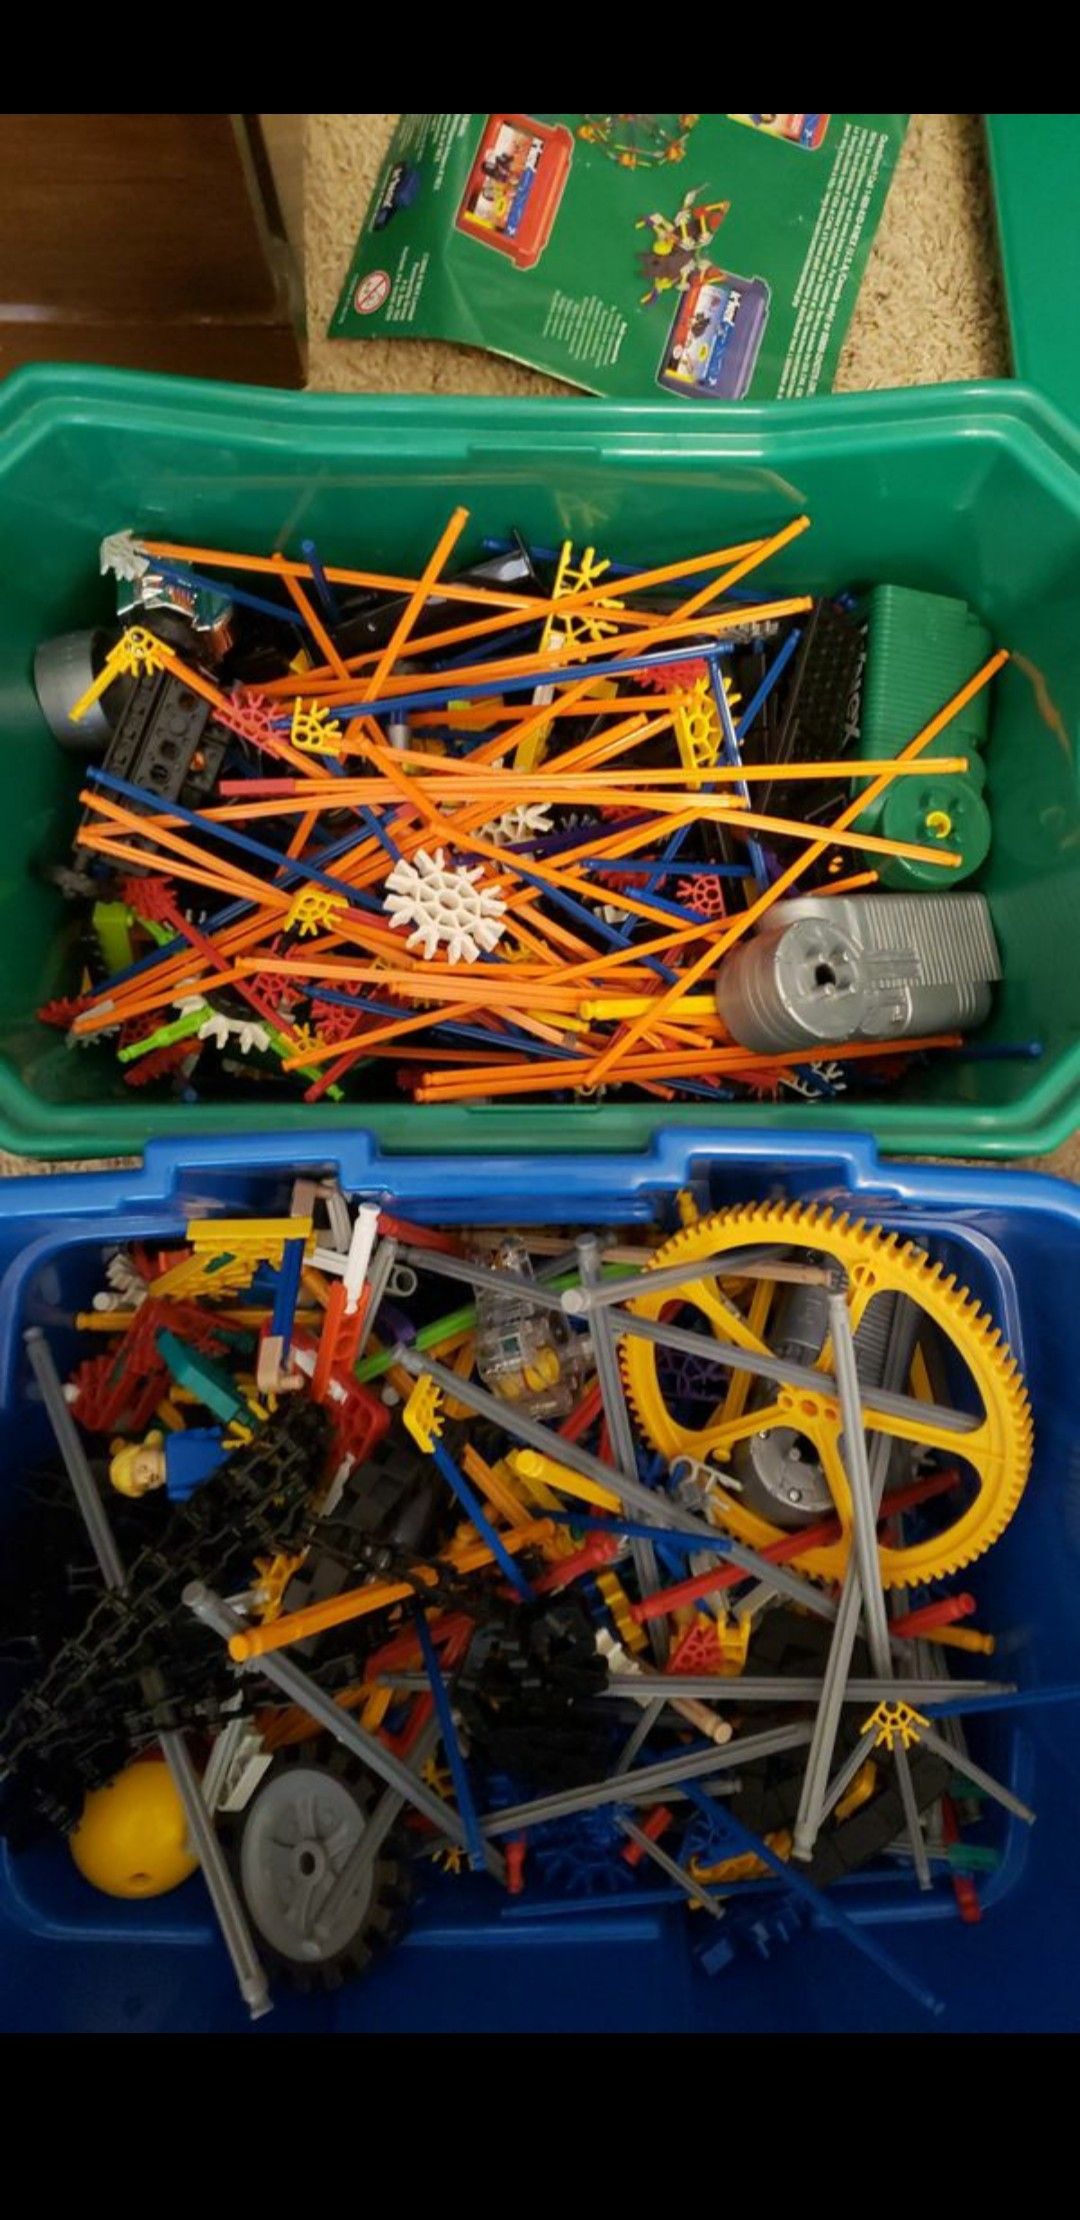 4 Different K'Nex sets, Over 1500 Pieces, Two Buckets